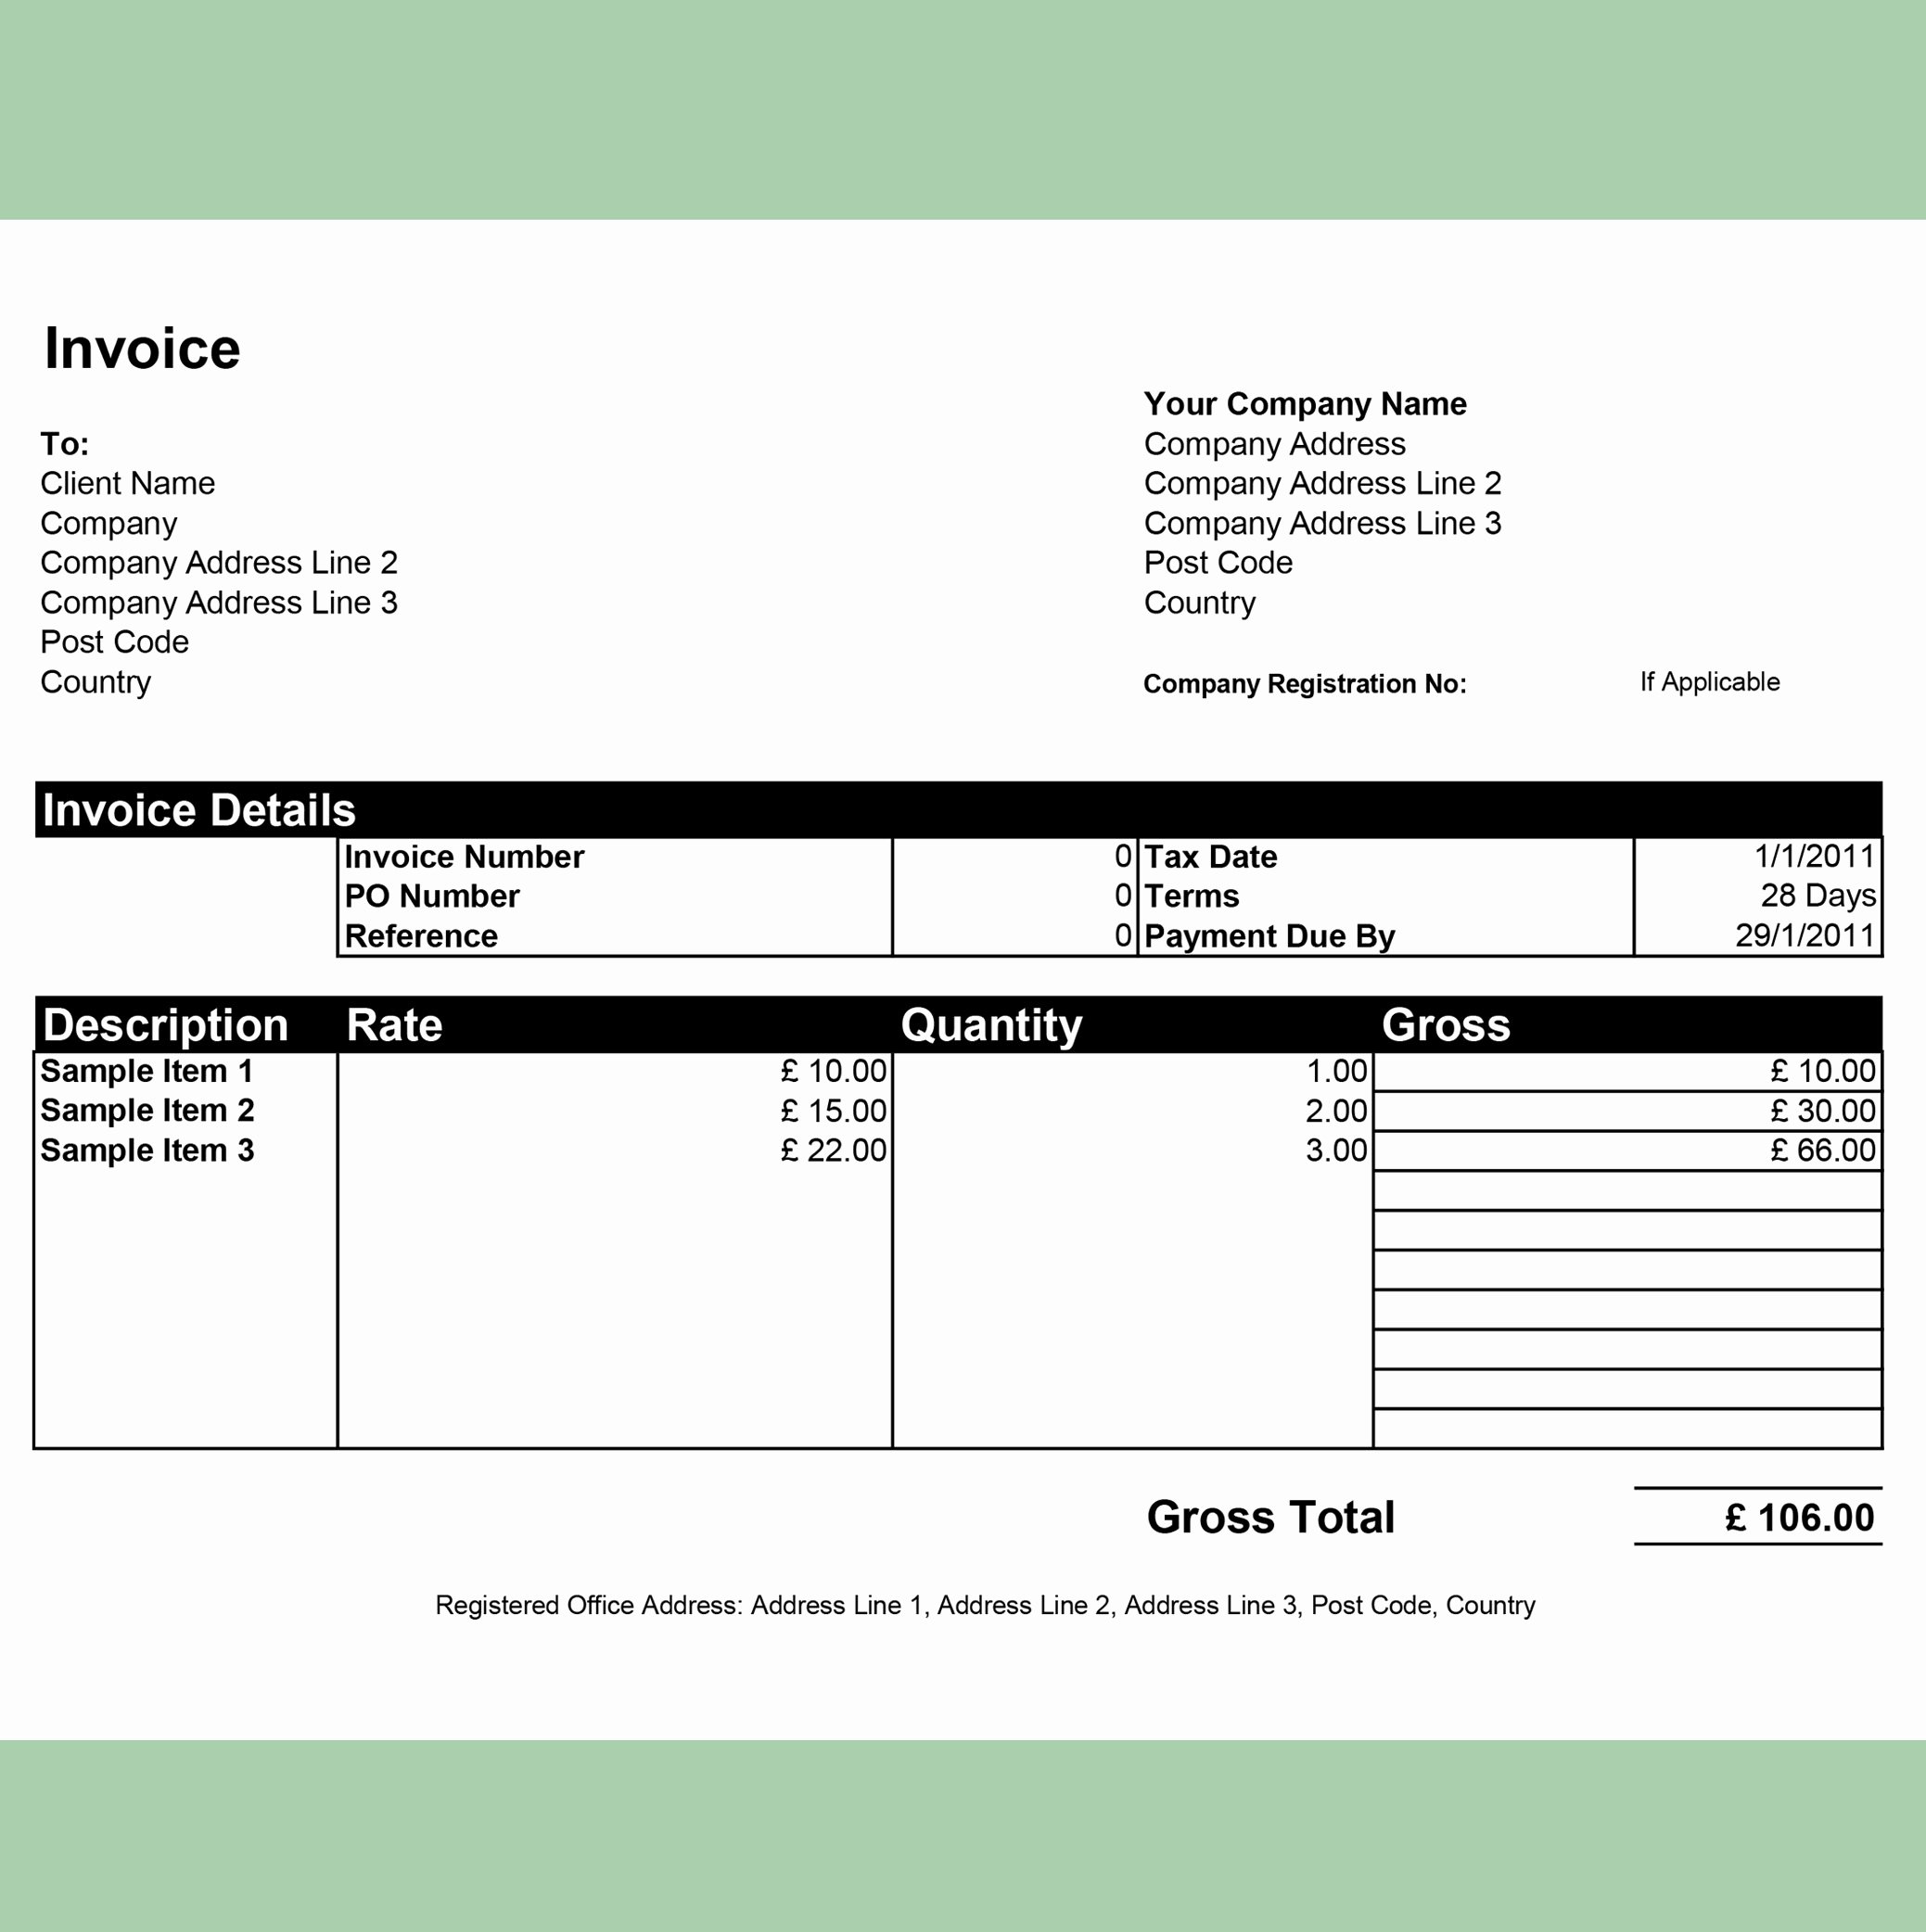 Invoice Spreadsheet Template Free New Free Invoice Templates by Invoiceberry the Grid System